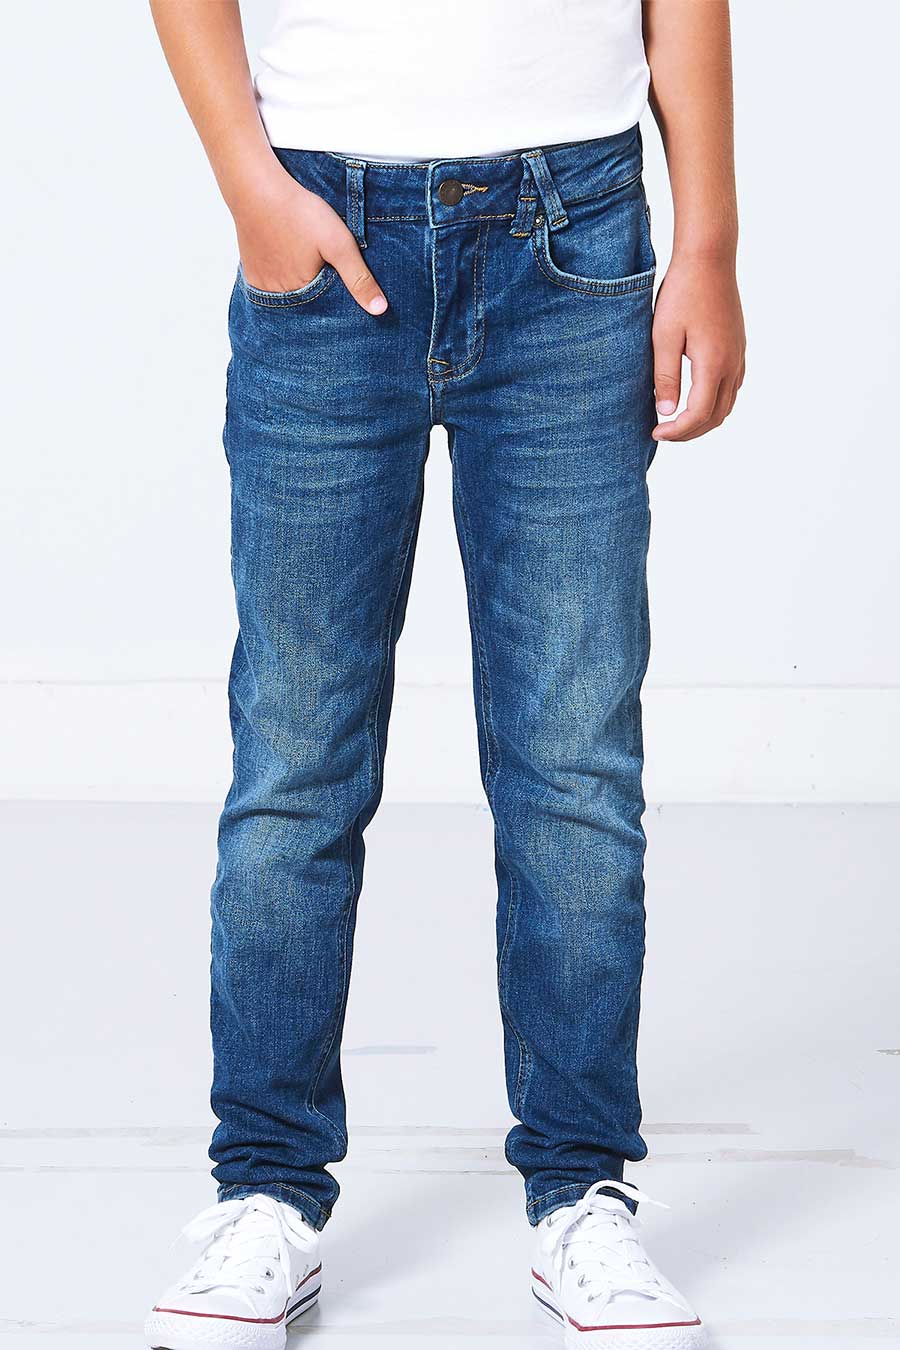 Boys jeans fit guide | America Today